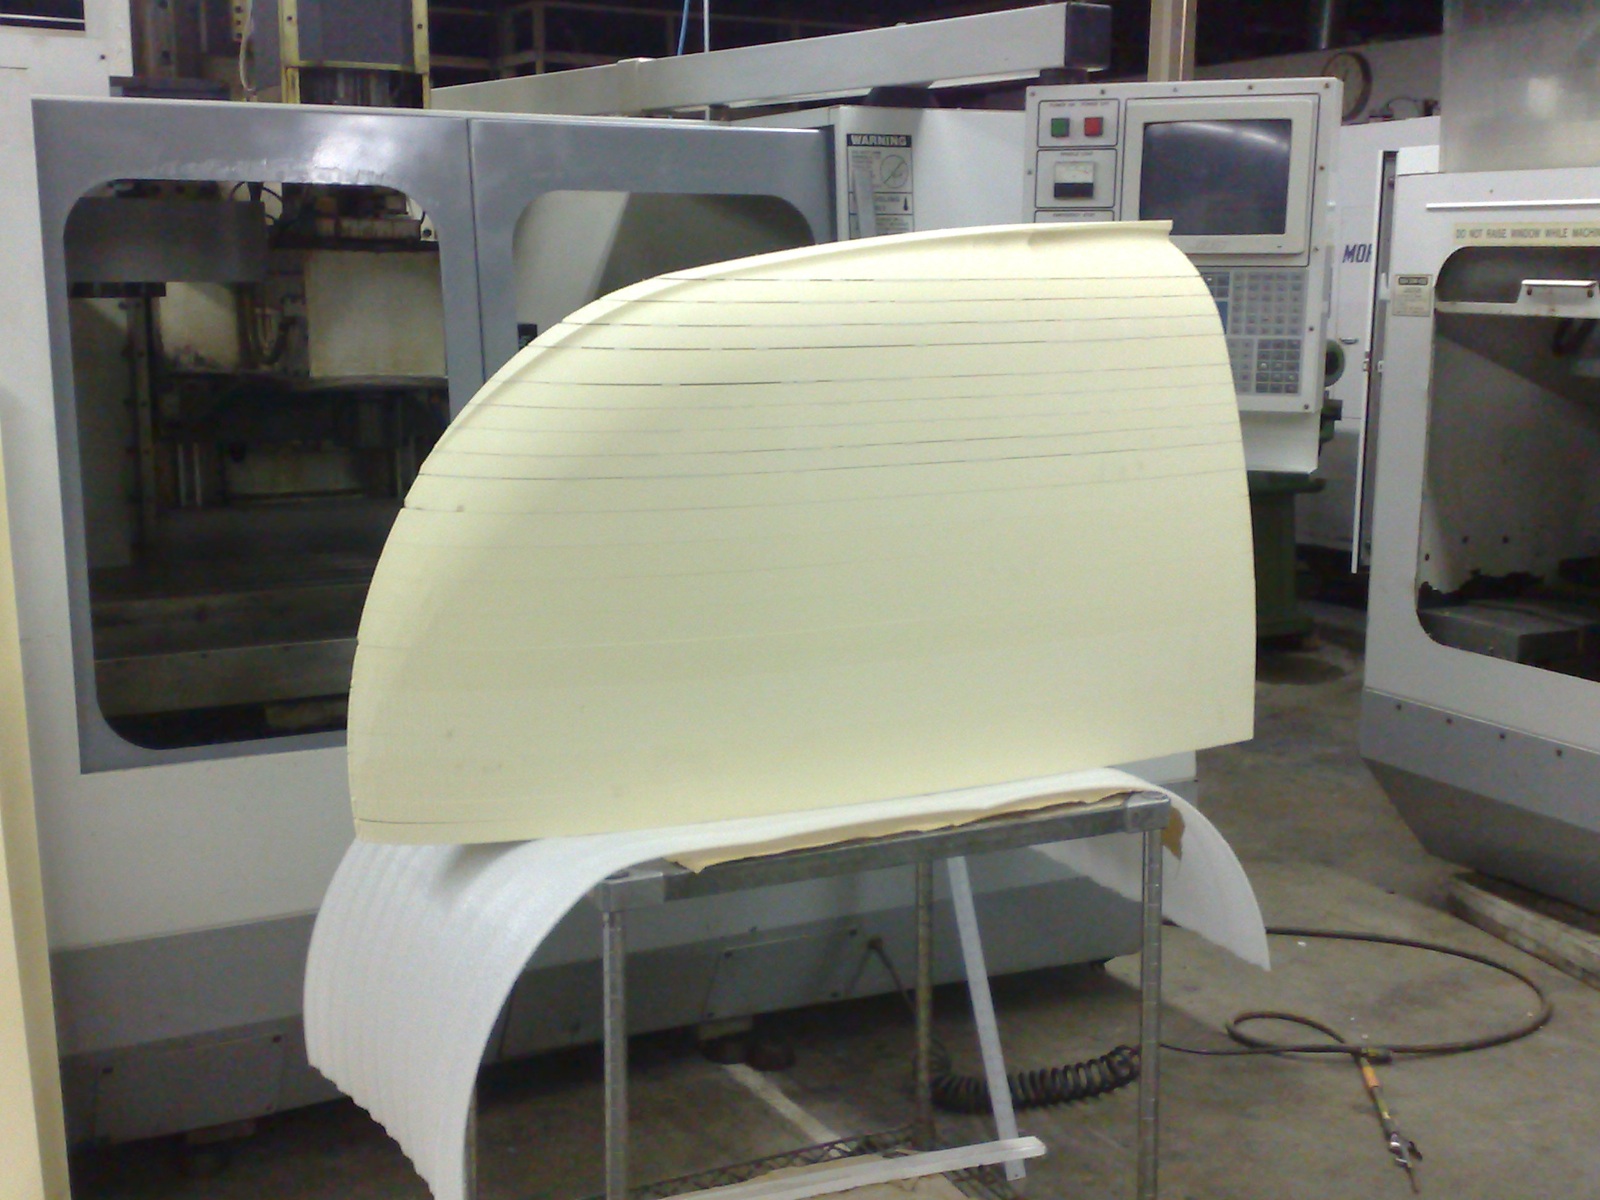 Nose portion of the fairing